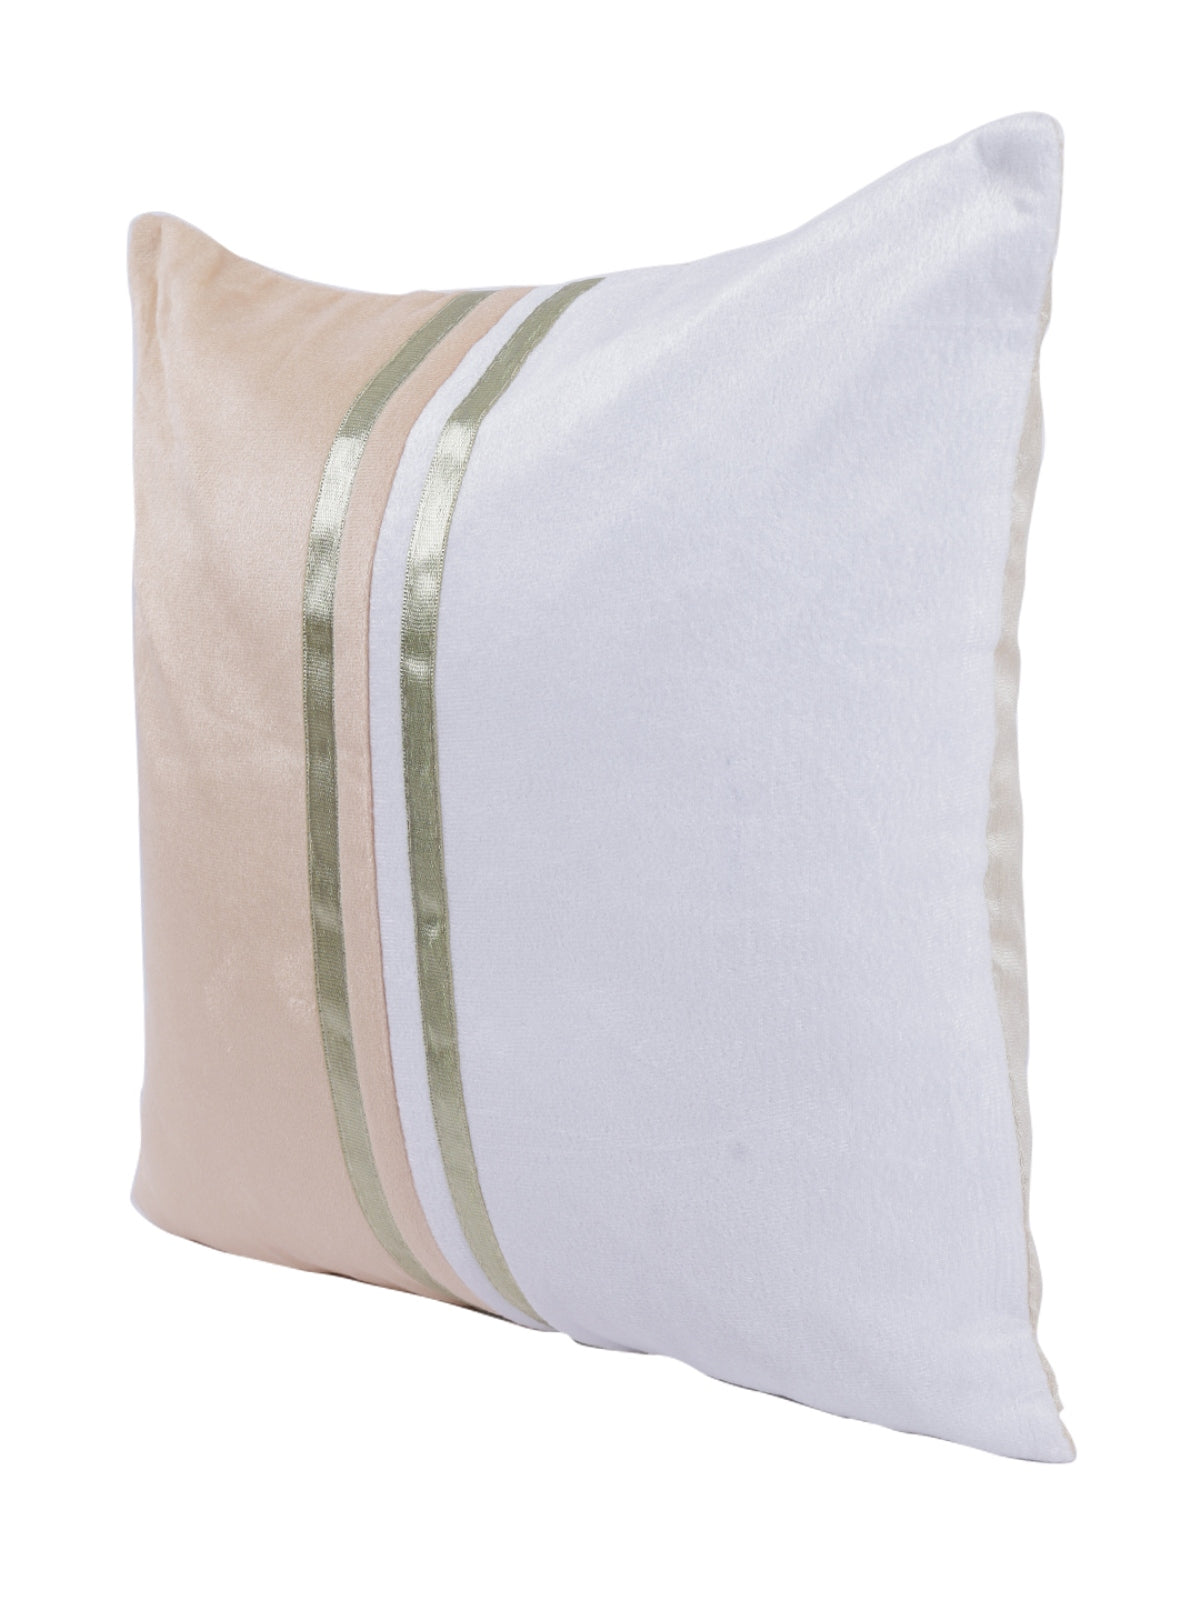 Beige & White Set of 5 Polyester 16 Inch x 16 Inch Cushion Covers